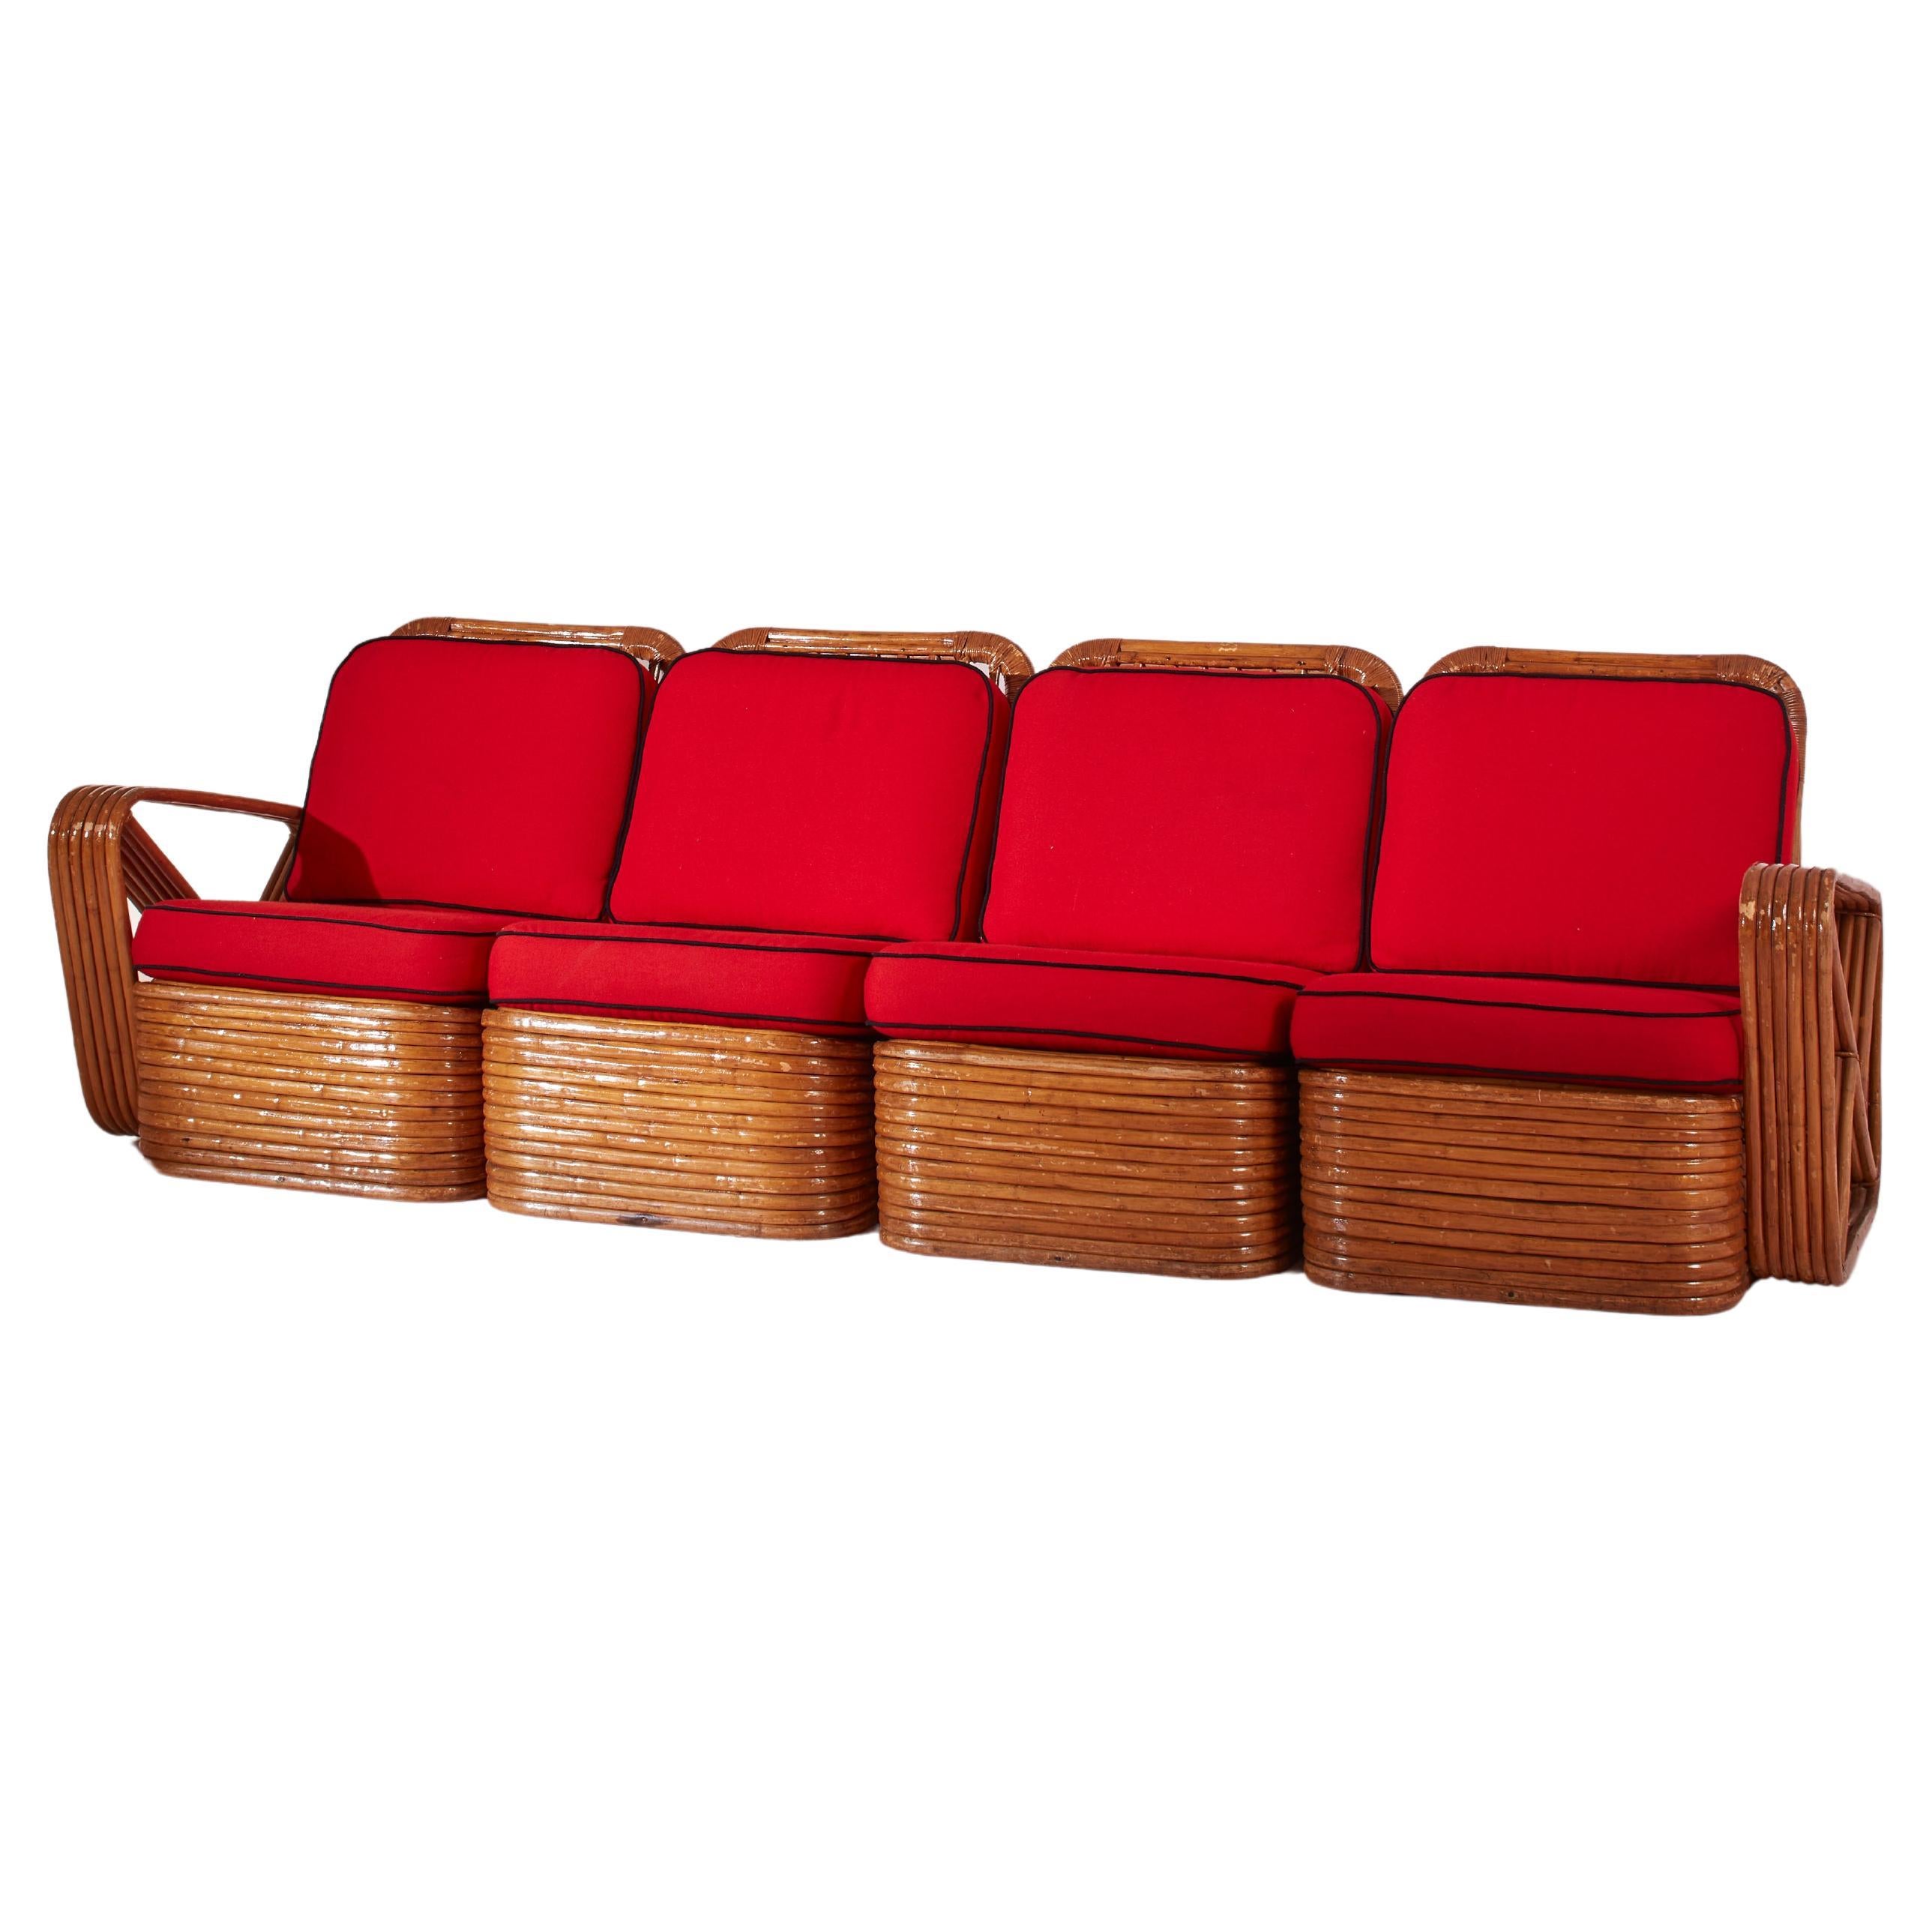 A four-seat rattan and fabric sectional sofa in the style of Paul Theodore Frank